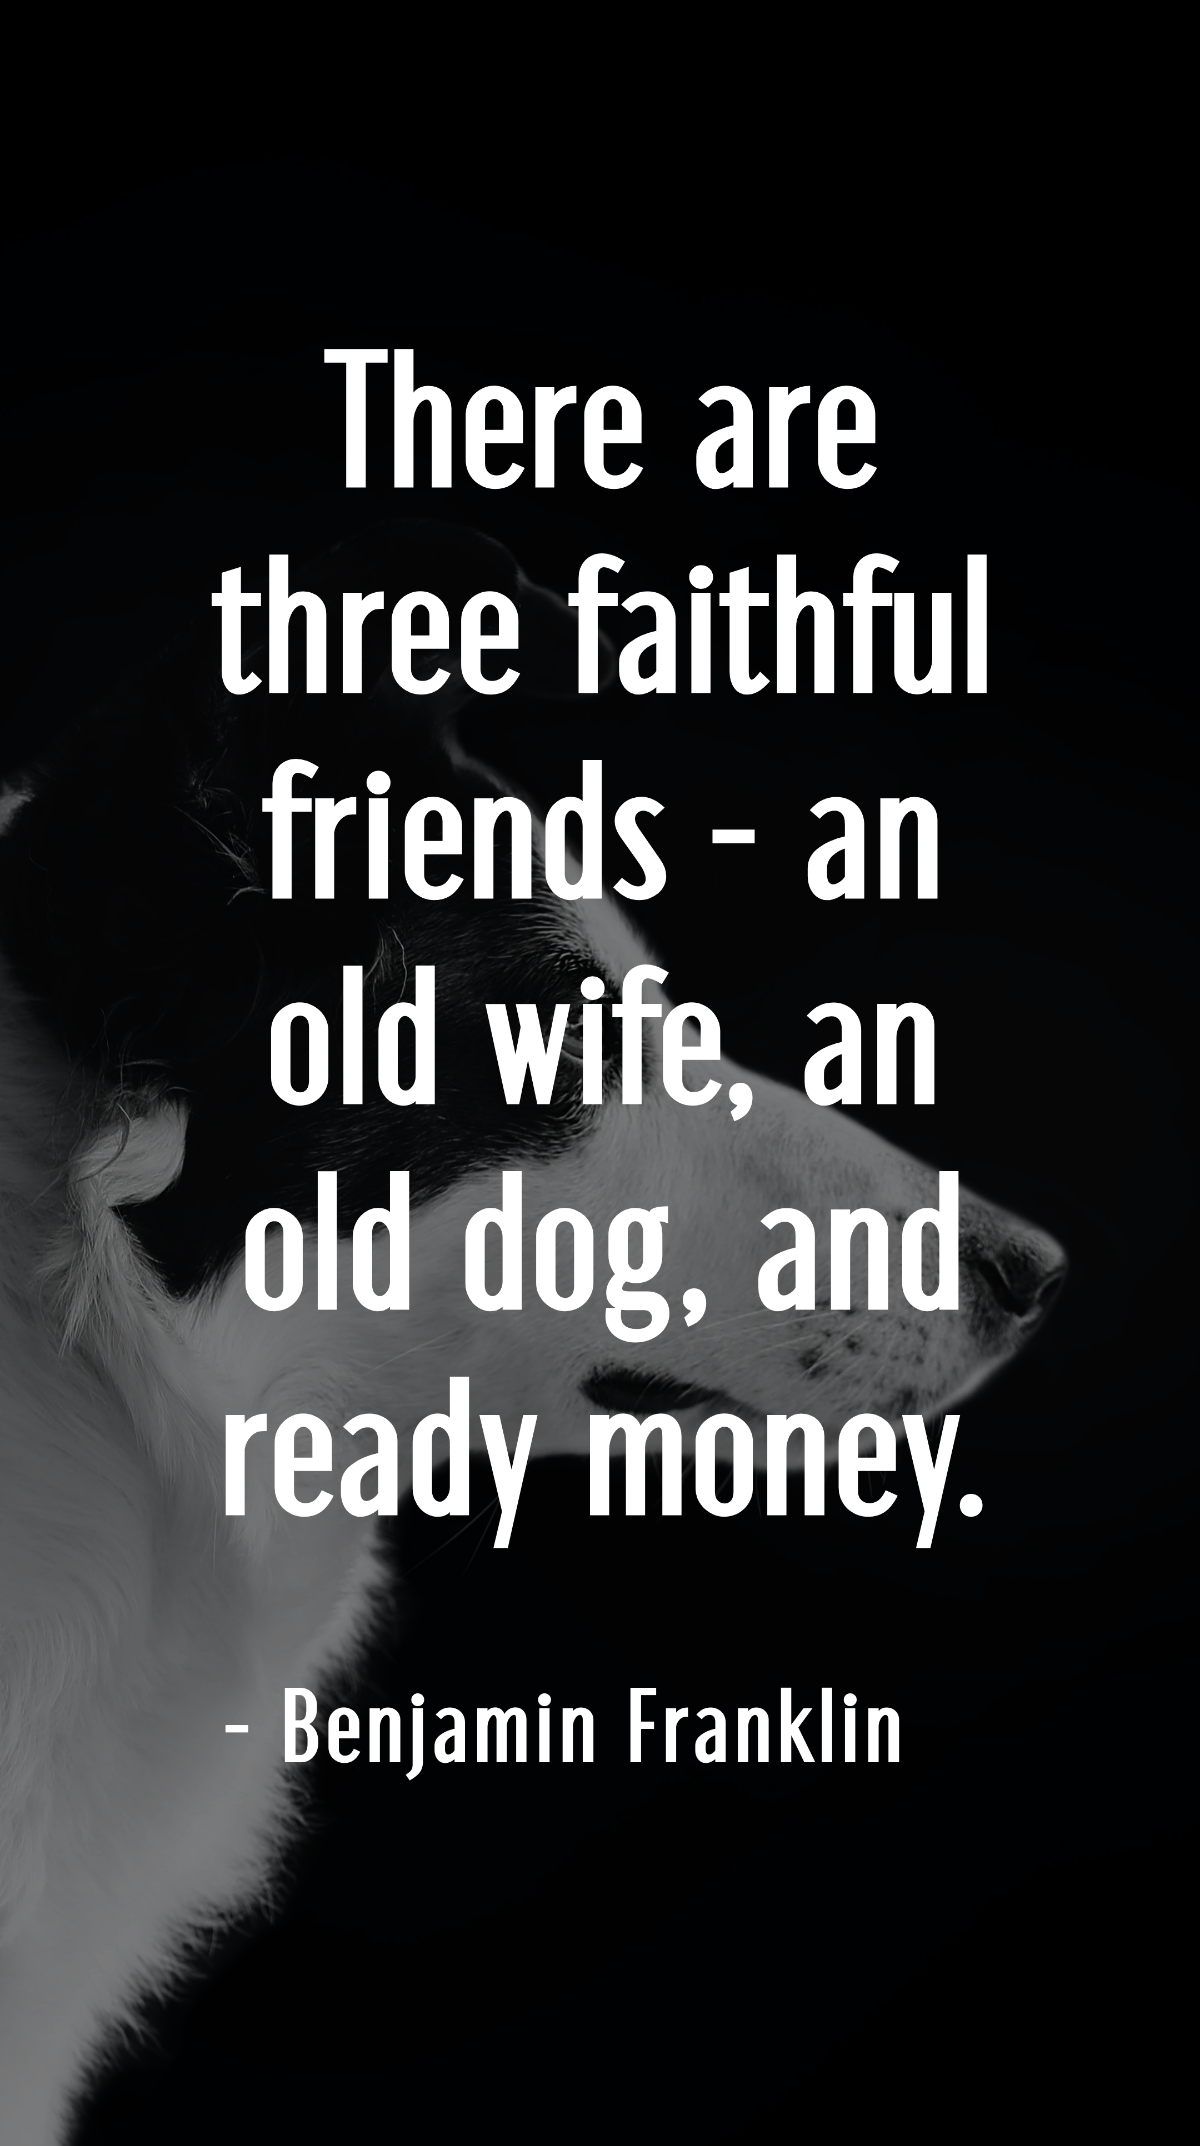 Benjamin Franklin - There are three faithful friends - an old wife, an old dog, and ready money. Template